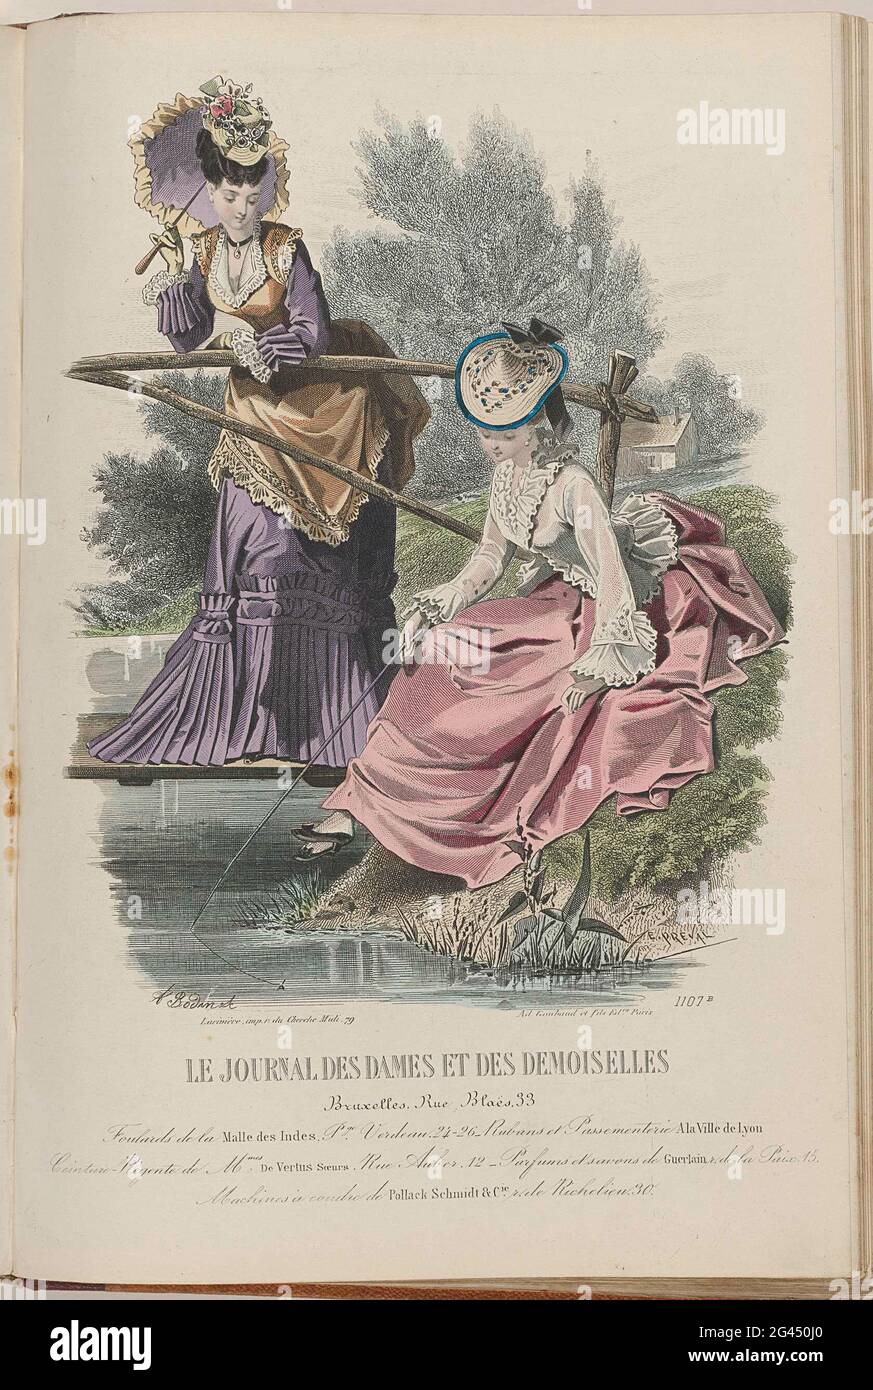 Journal des Ladies et des Demoiselles, 15 Novembre 1872, No. 1107b. A young  lady with rod on the ditch side, dressed in a role of pink linen with a  'pouf' on the